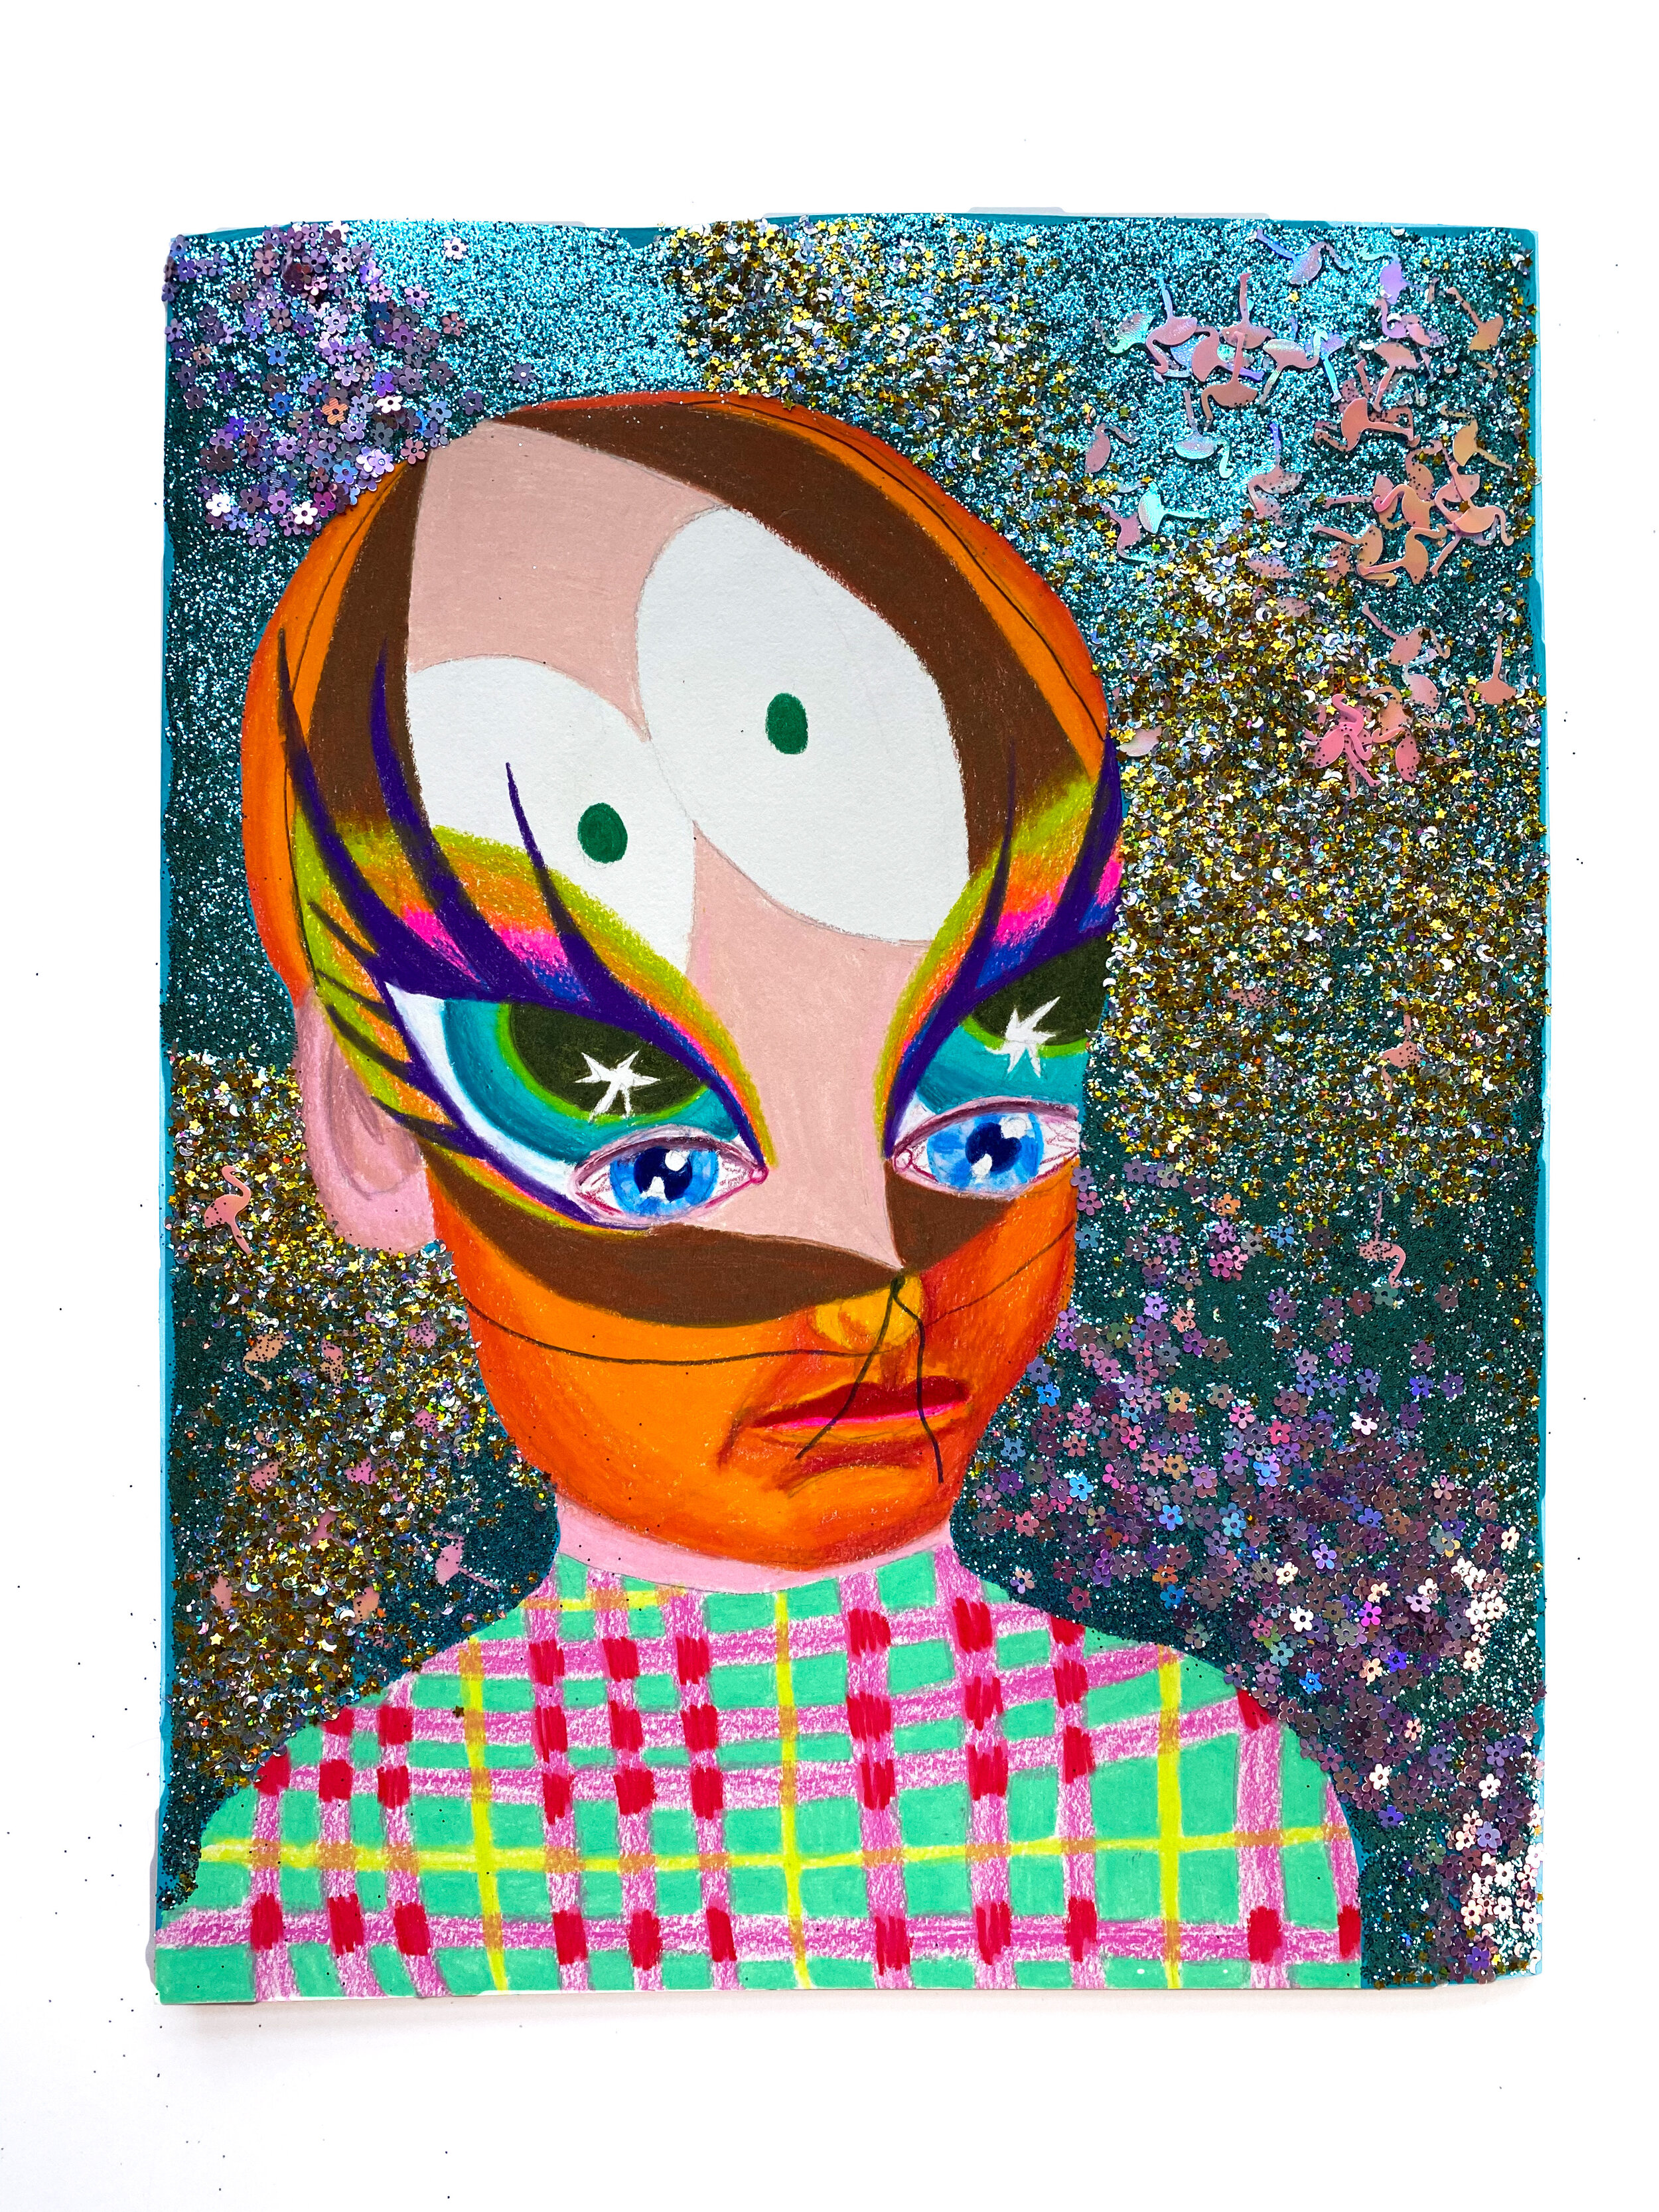   Baby with Kenny Face Paint,  2021  14 x 11 inches (38.1 x 27.94 cm.)  Colored pencil, acrylic paint, Elmer's glue, Modge Podge, and glitter on paper 